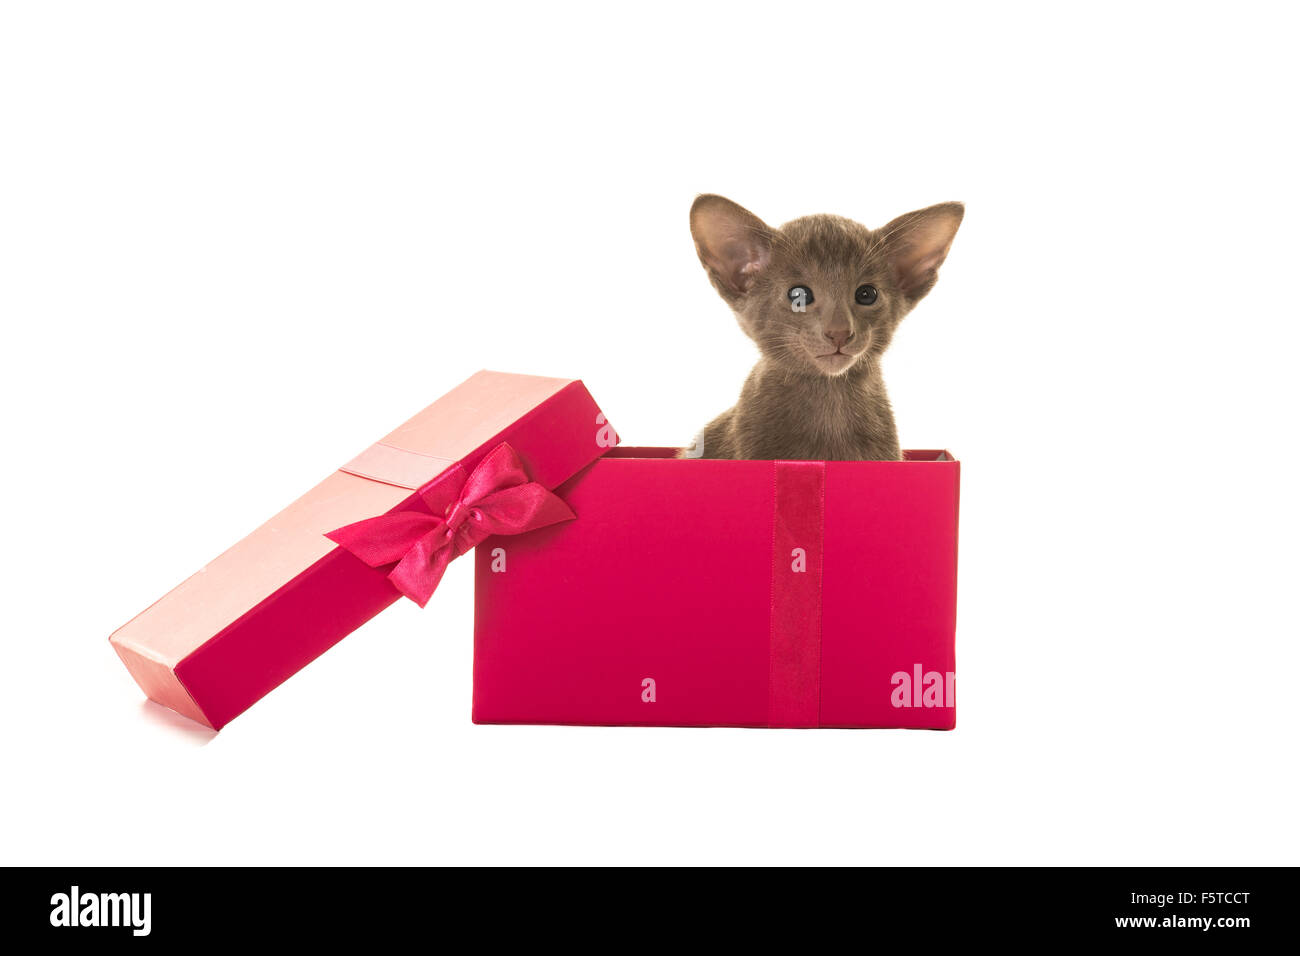 Cute siamese baby cat in a pink gift box isolated on a white background Stock Photo